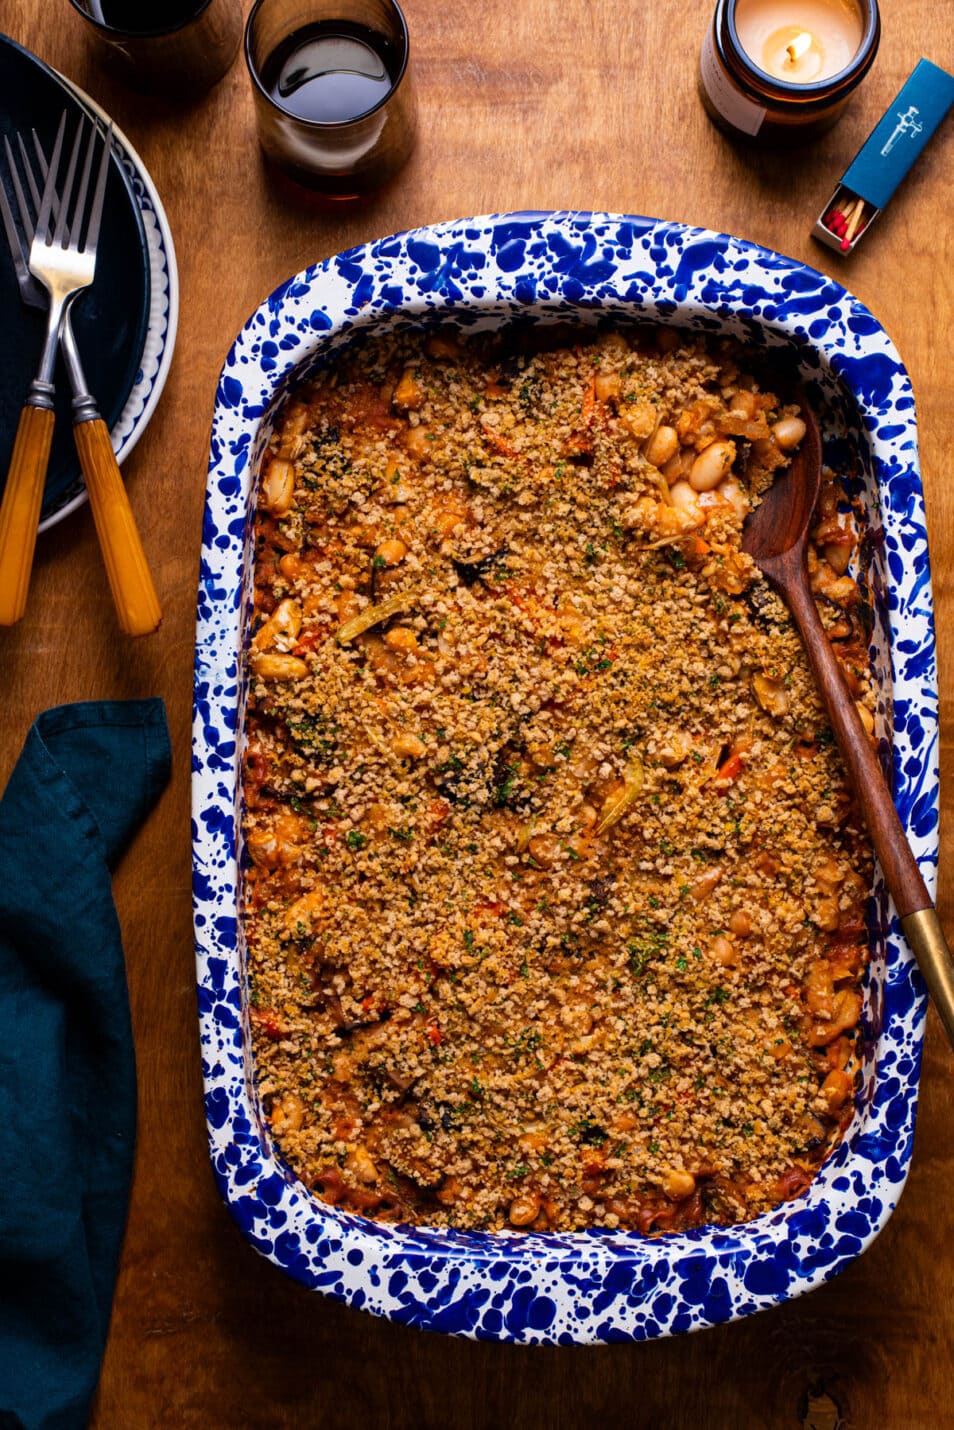 A glass Pyrex pan of vegan cassoulet next to 2 ceramic plates on a beige tablecloth